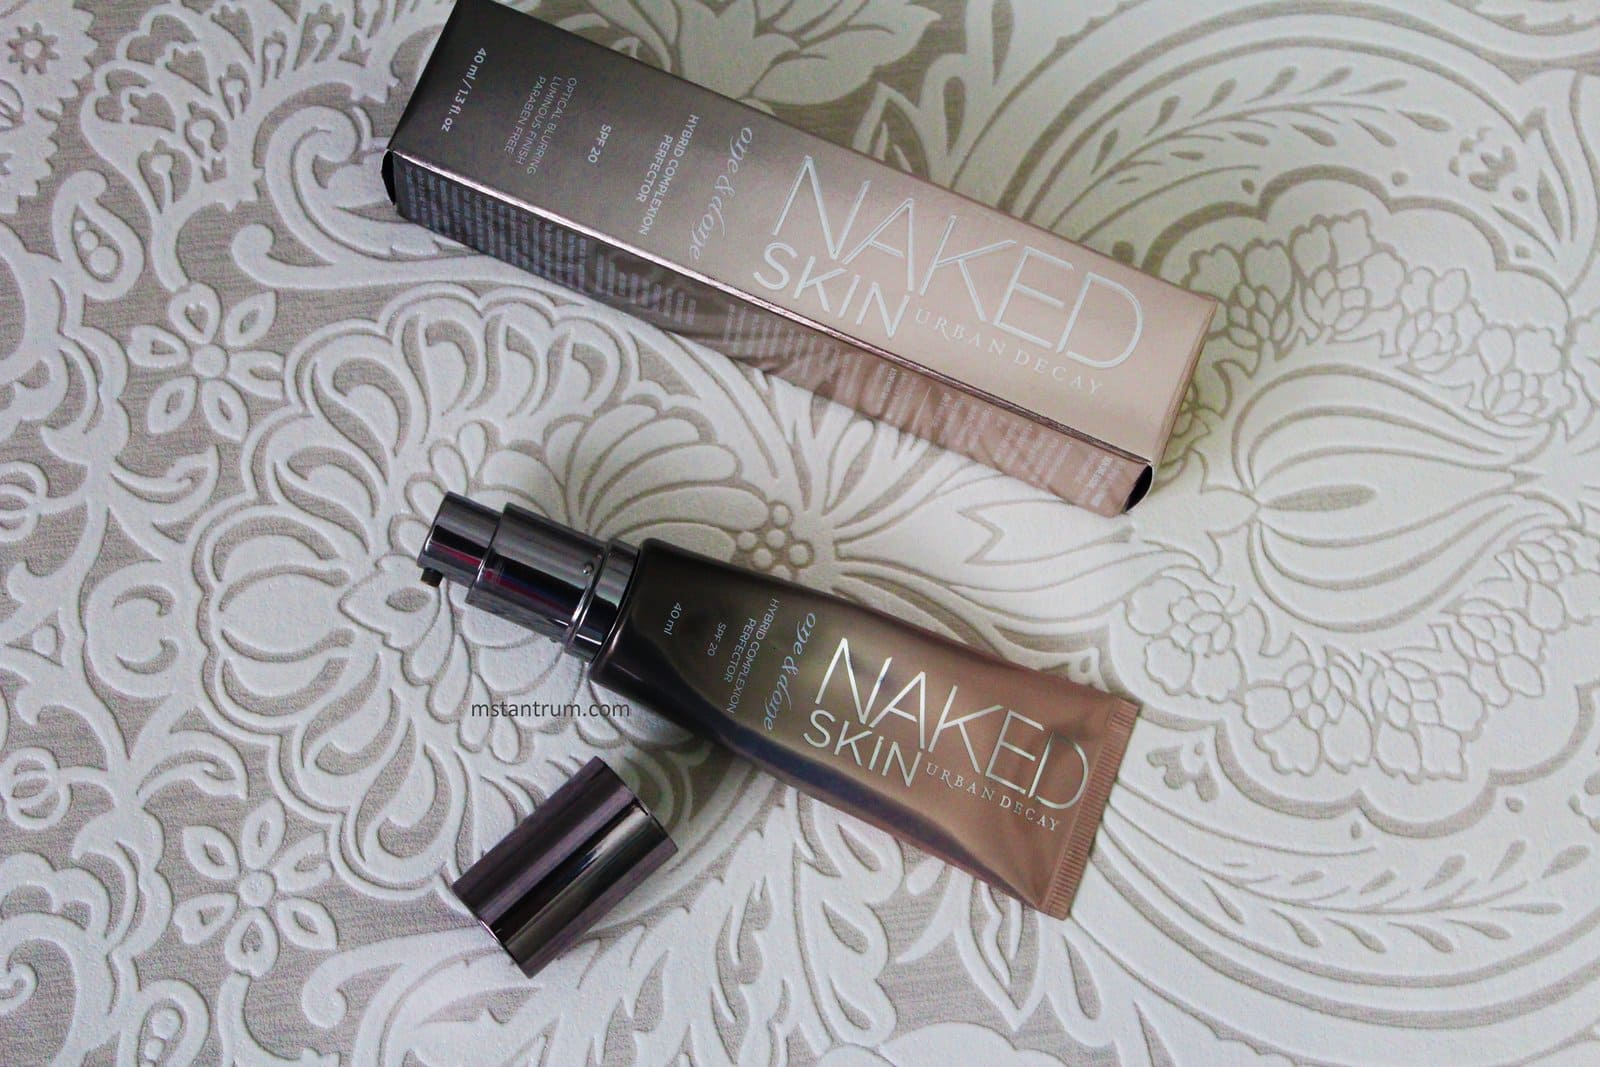 Urban Decay Naked Skin One & Done Hybrid complexion perfector